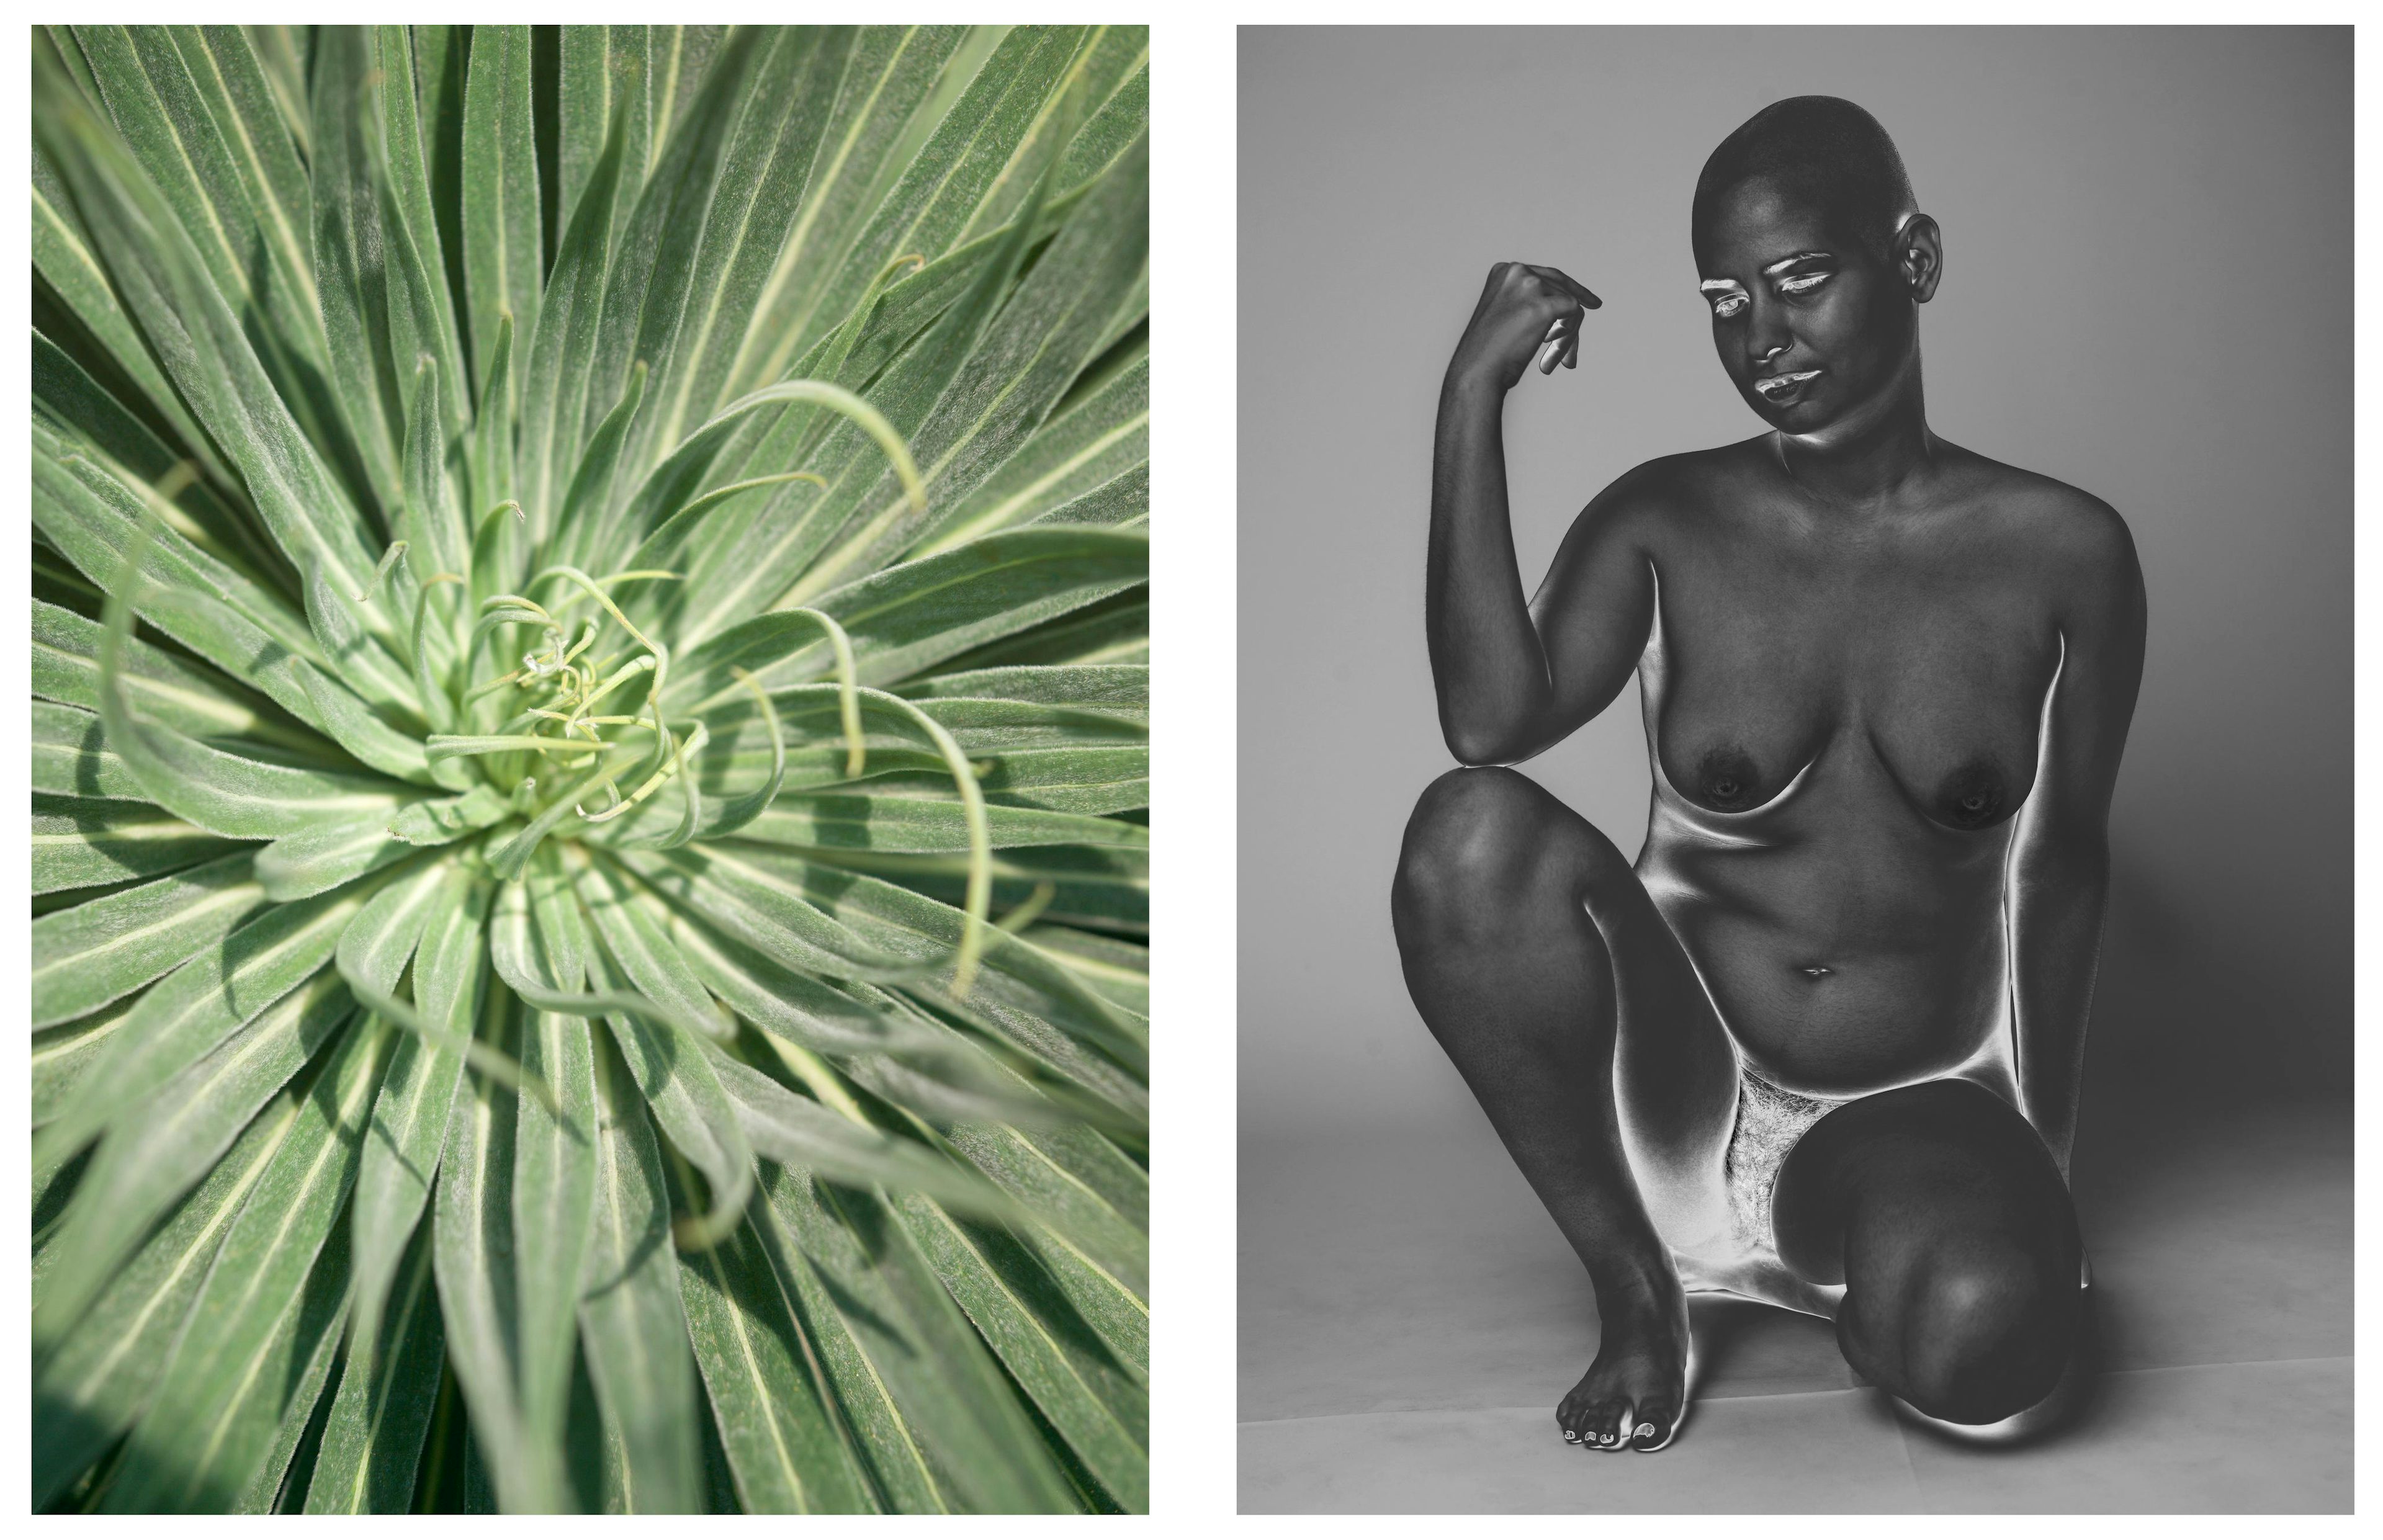 From left to right: Bushes and Succulents - Succulents #32, Bushes and Succulents - Bushes #32, Mona Kuhn